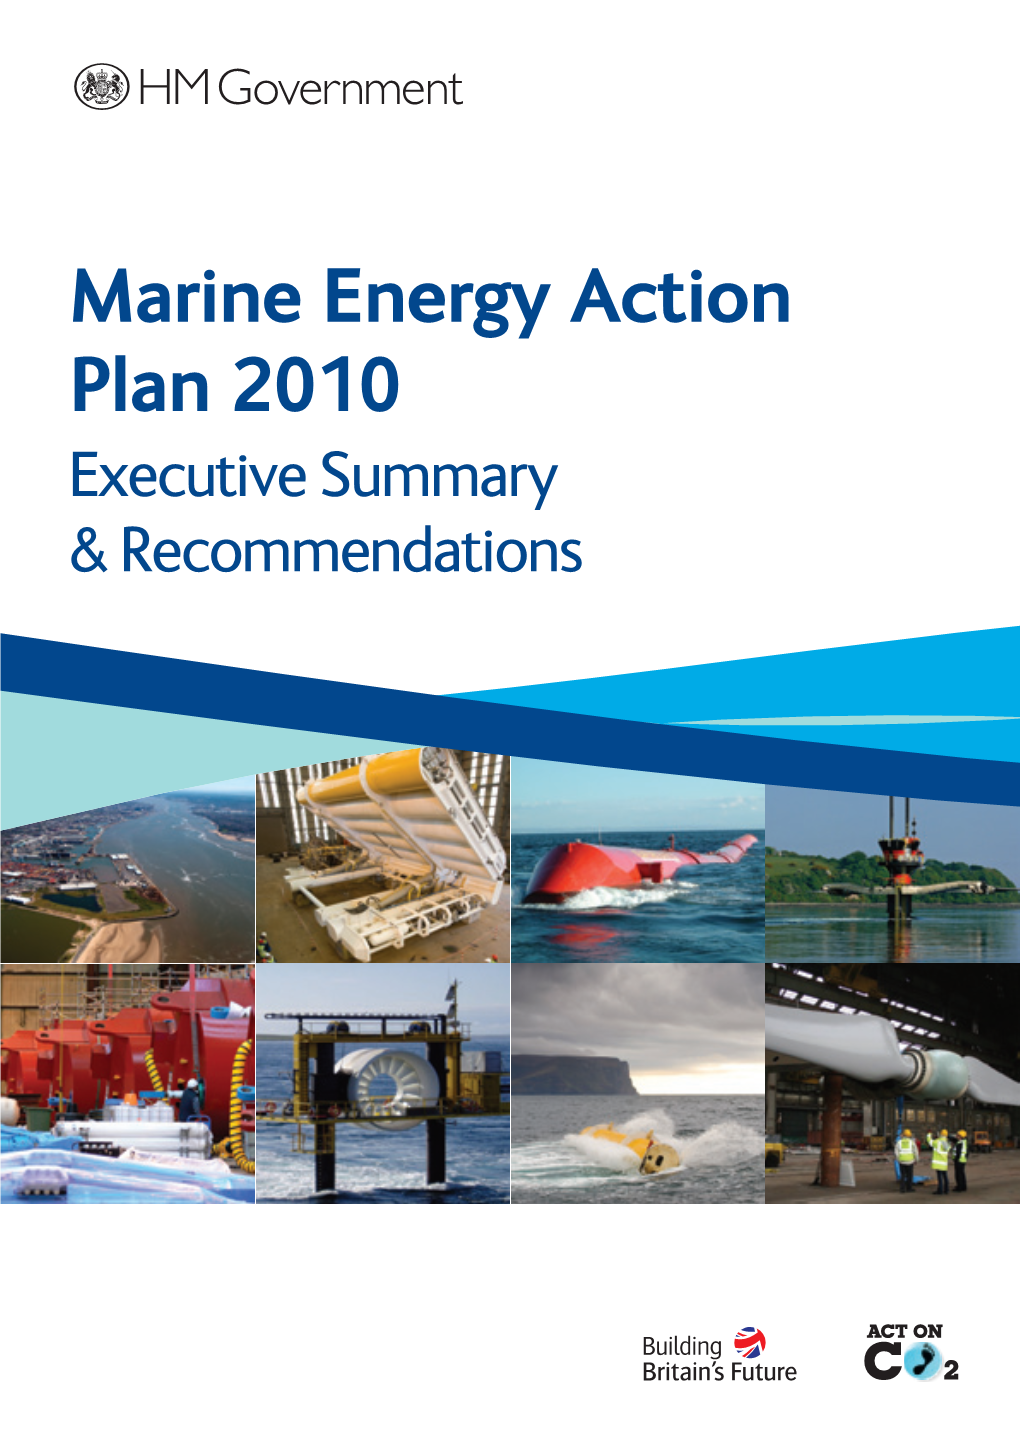 Marine Energy Action Plan 2010 Executive Summary & Recommendations